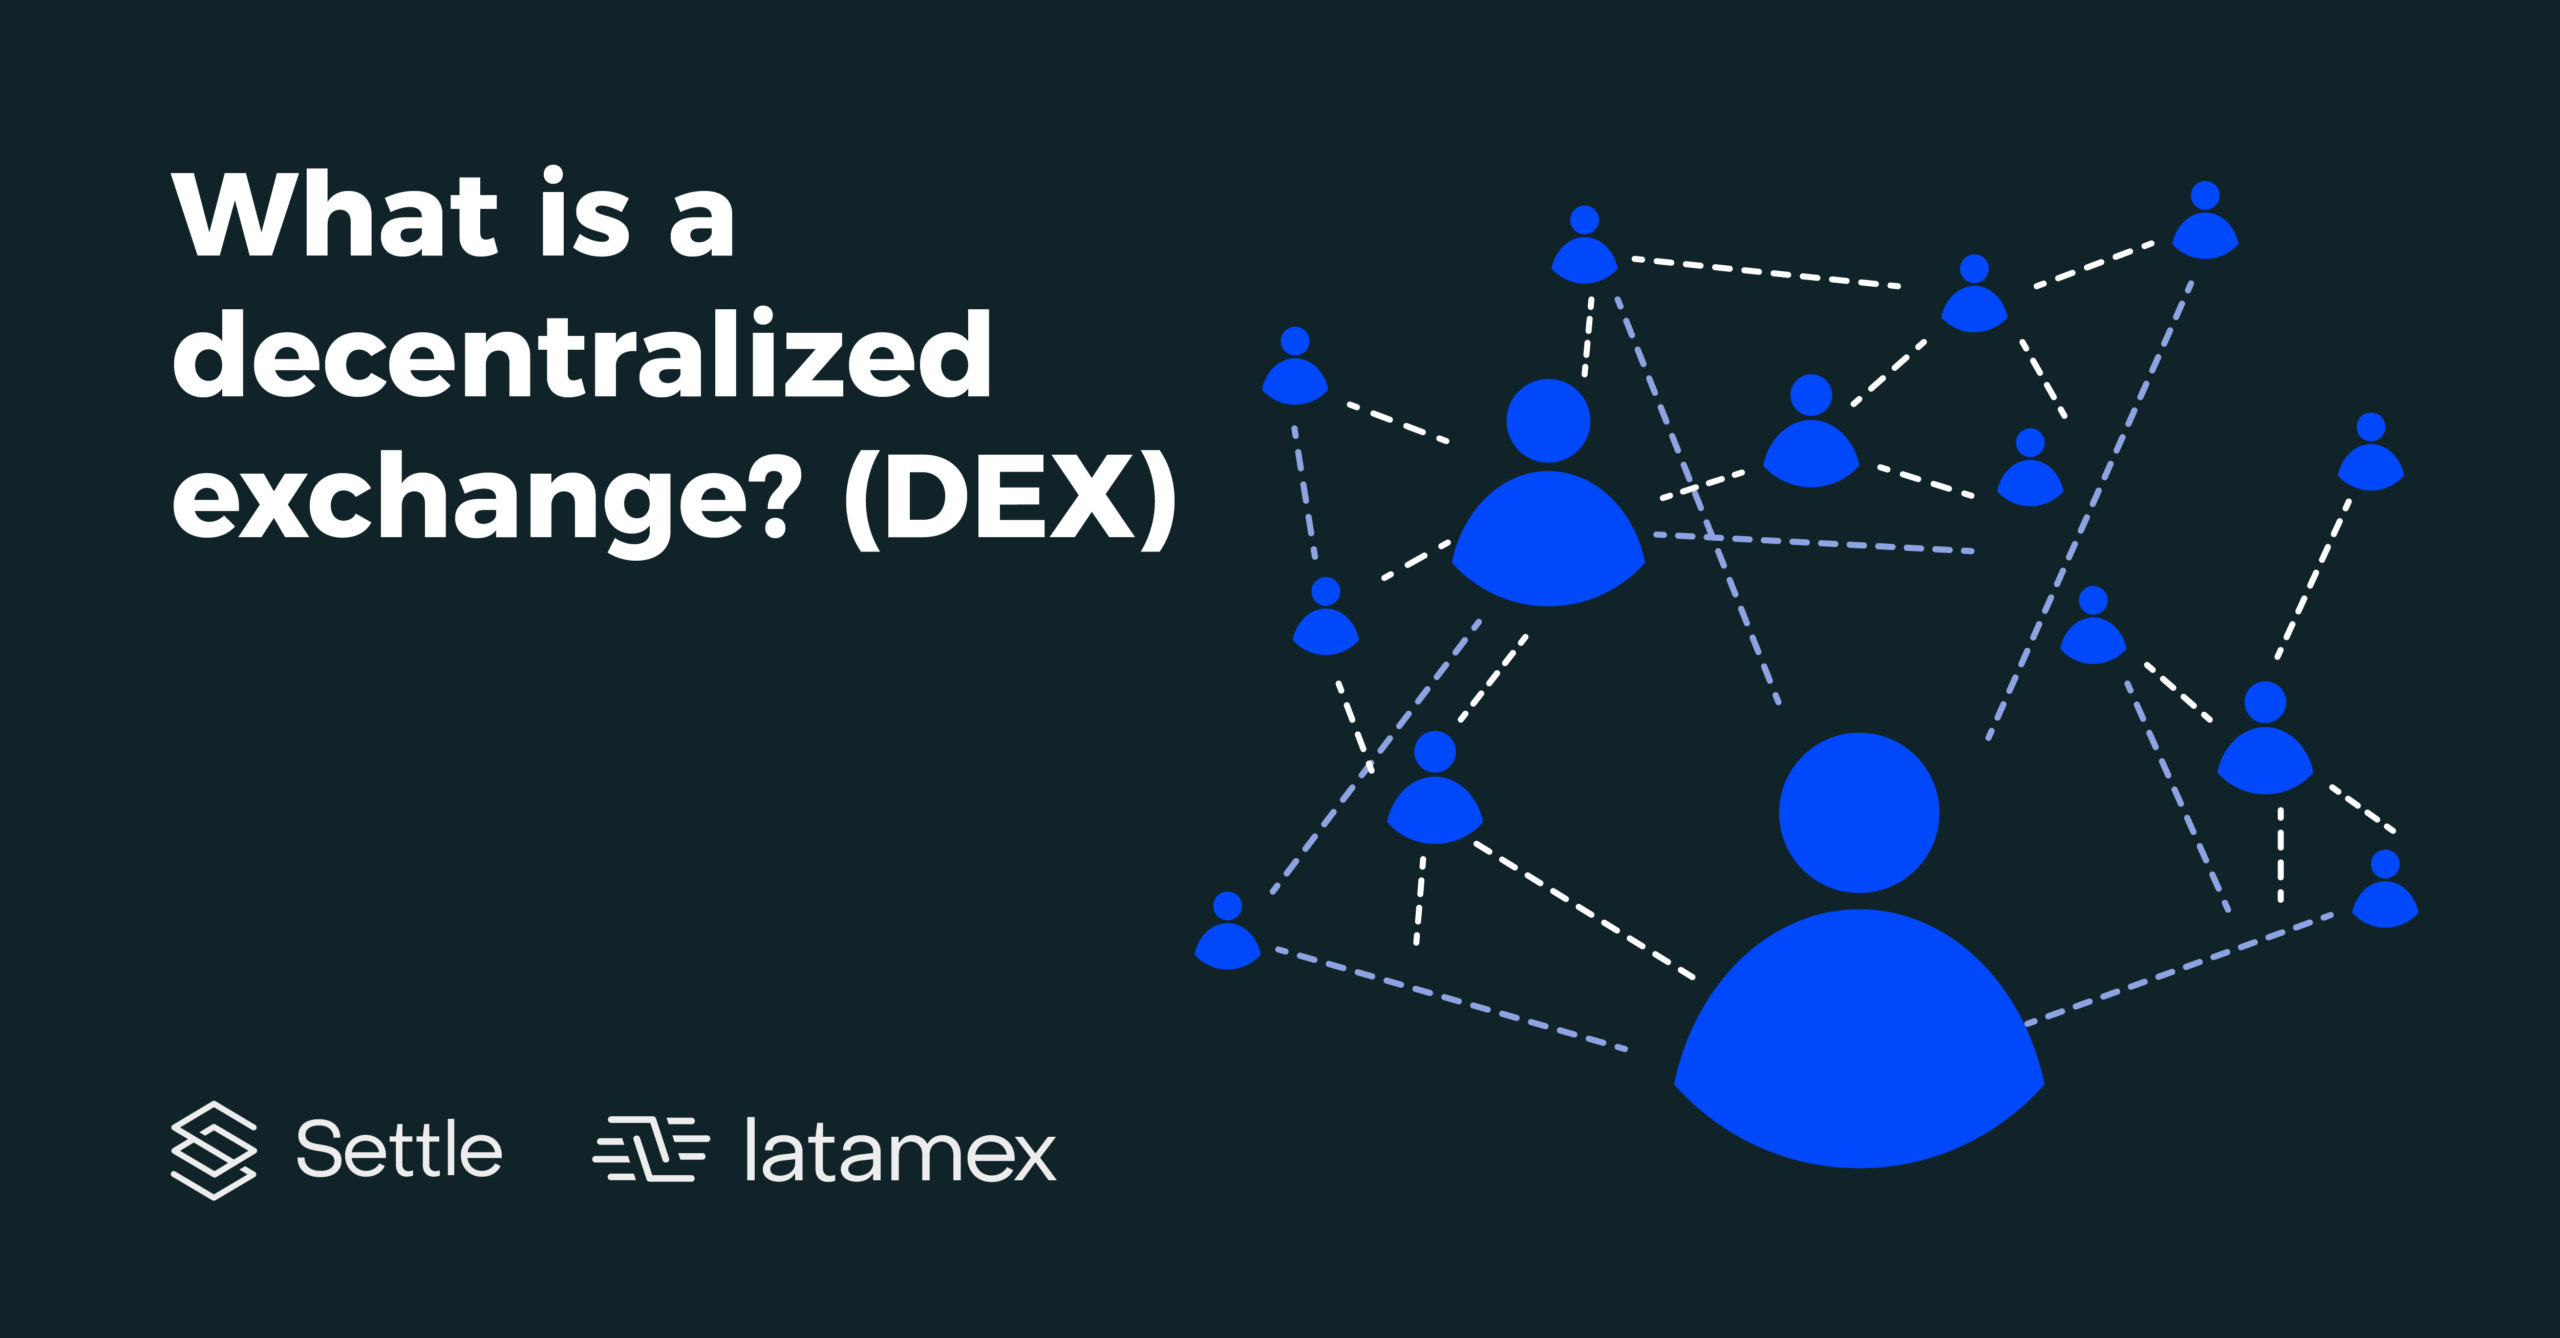 What is a decentralized exchange (DEX)?